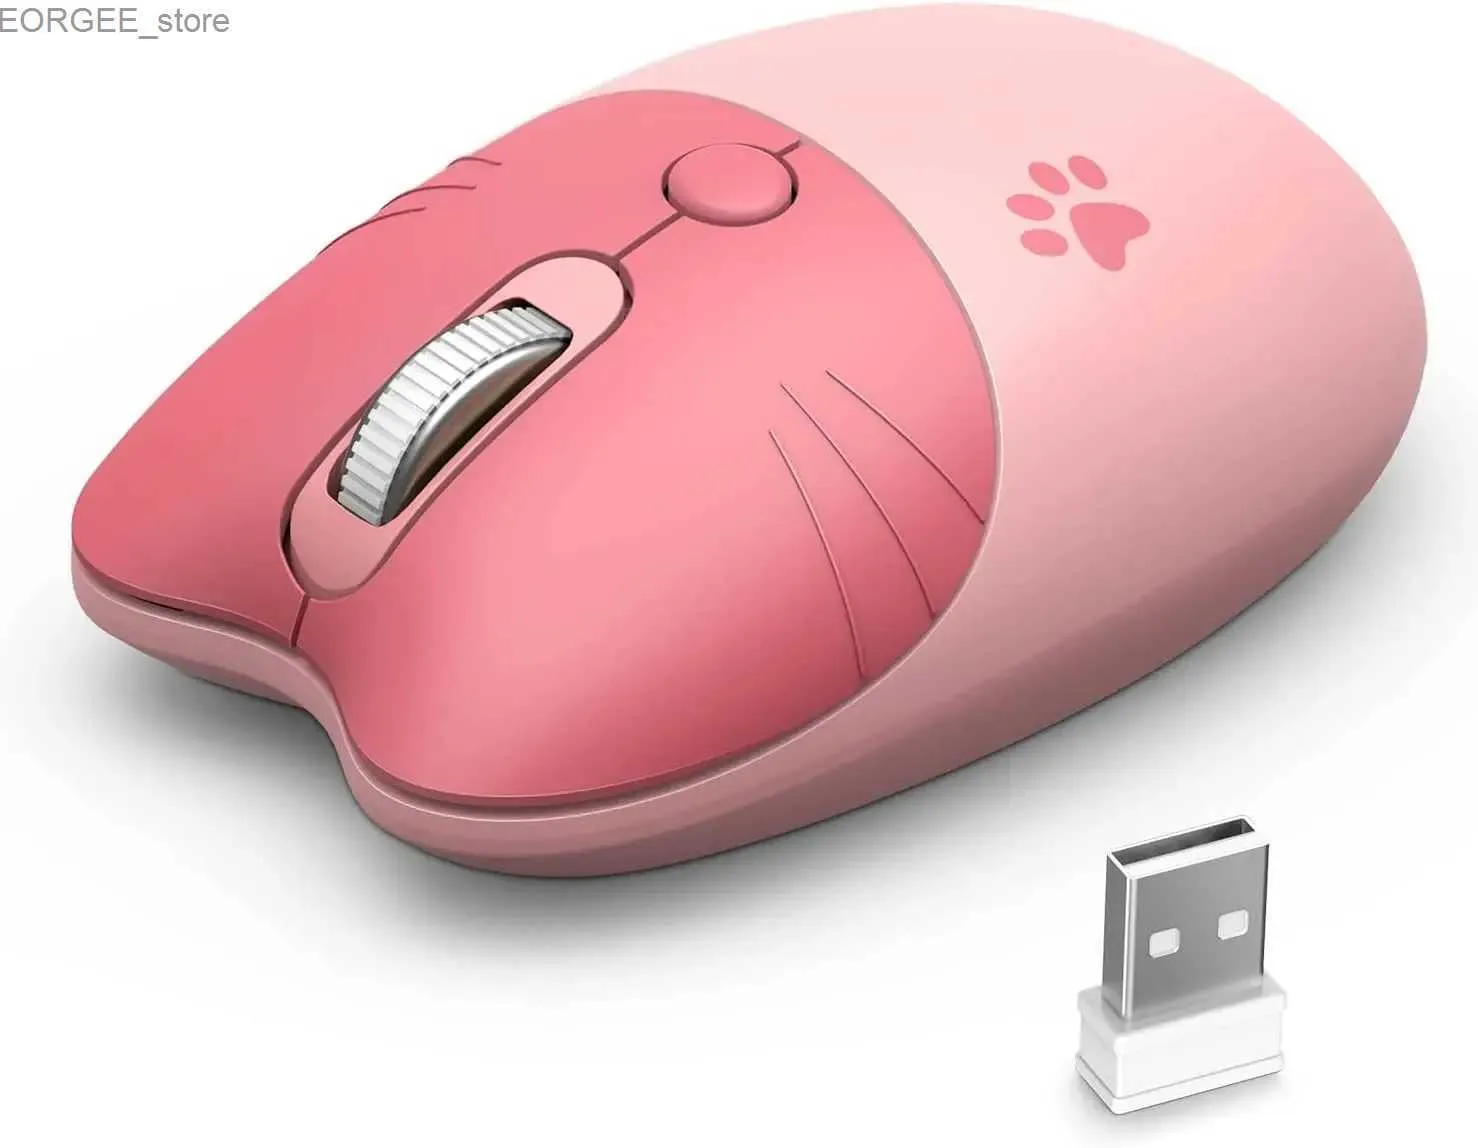 Mice Mofii Cute Cat 2.4G wireless mouse USB receiver plug and play 3 adjustable DPI compatible with laptops PCs and computers Y240407